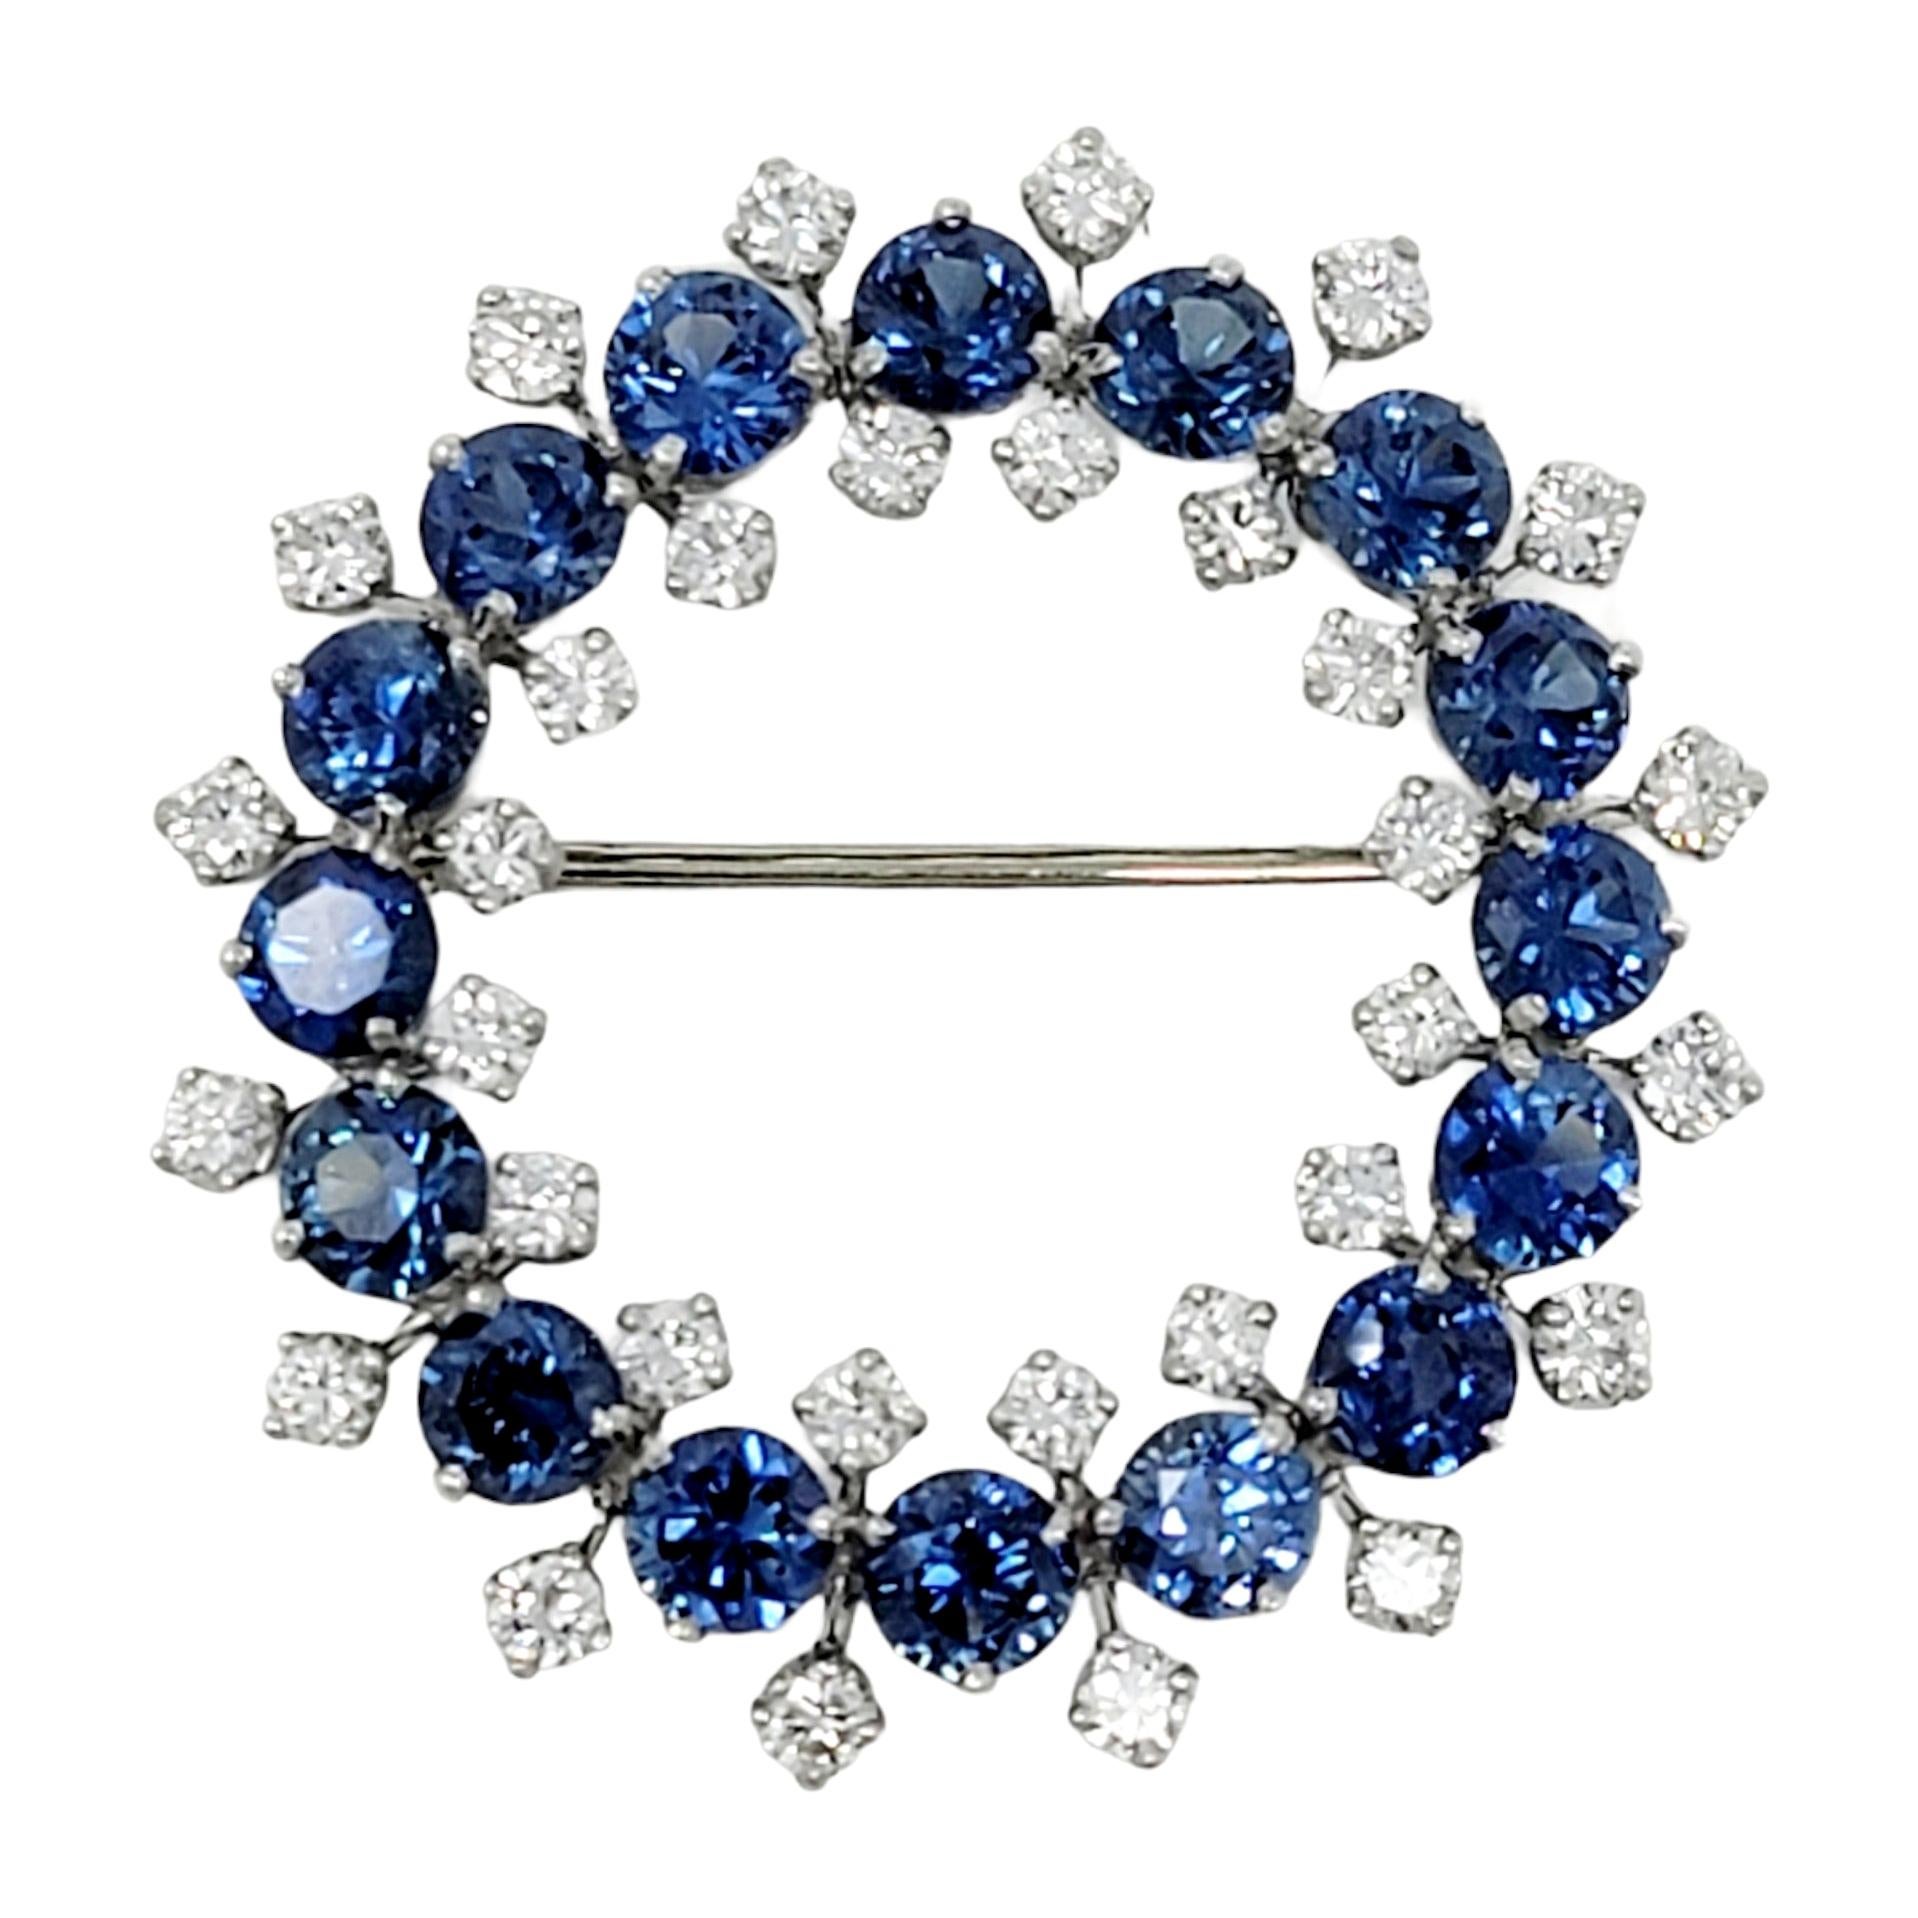 8.17 Carats Total Sapphire and Diamond Open Circle Wreath Brooch in Platinum